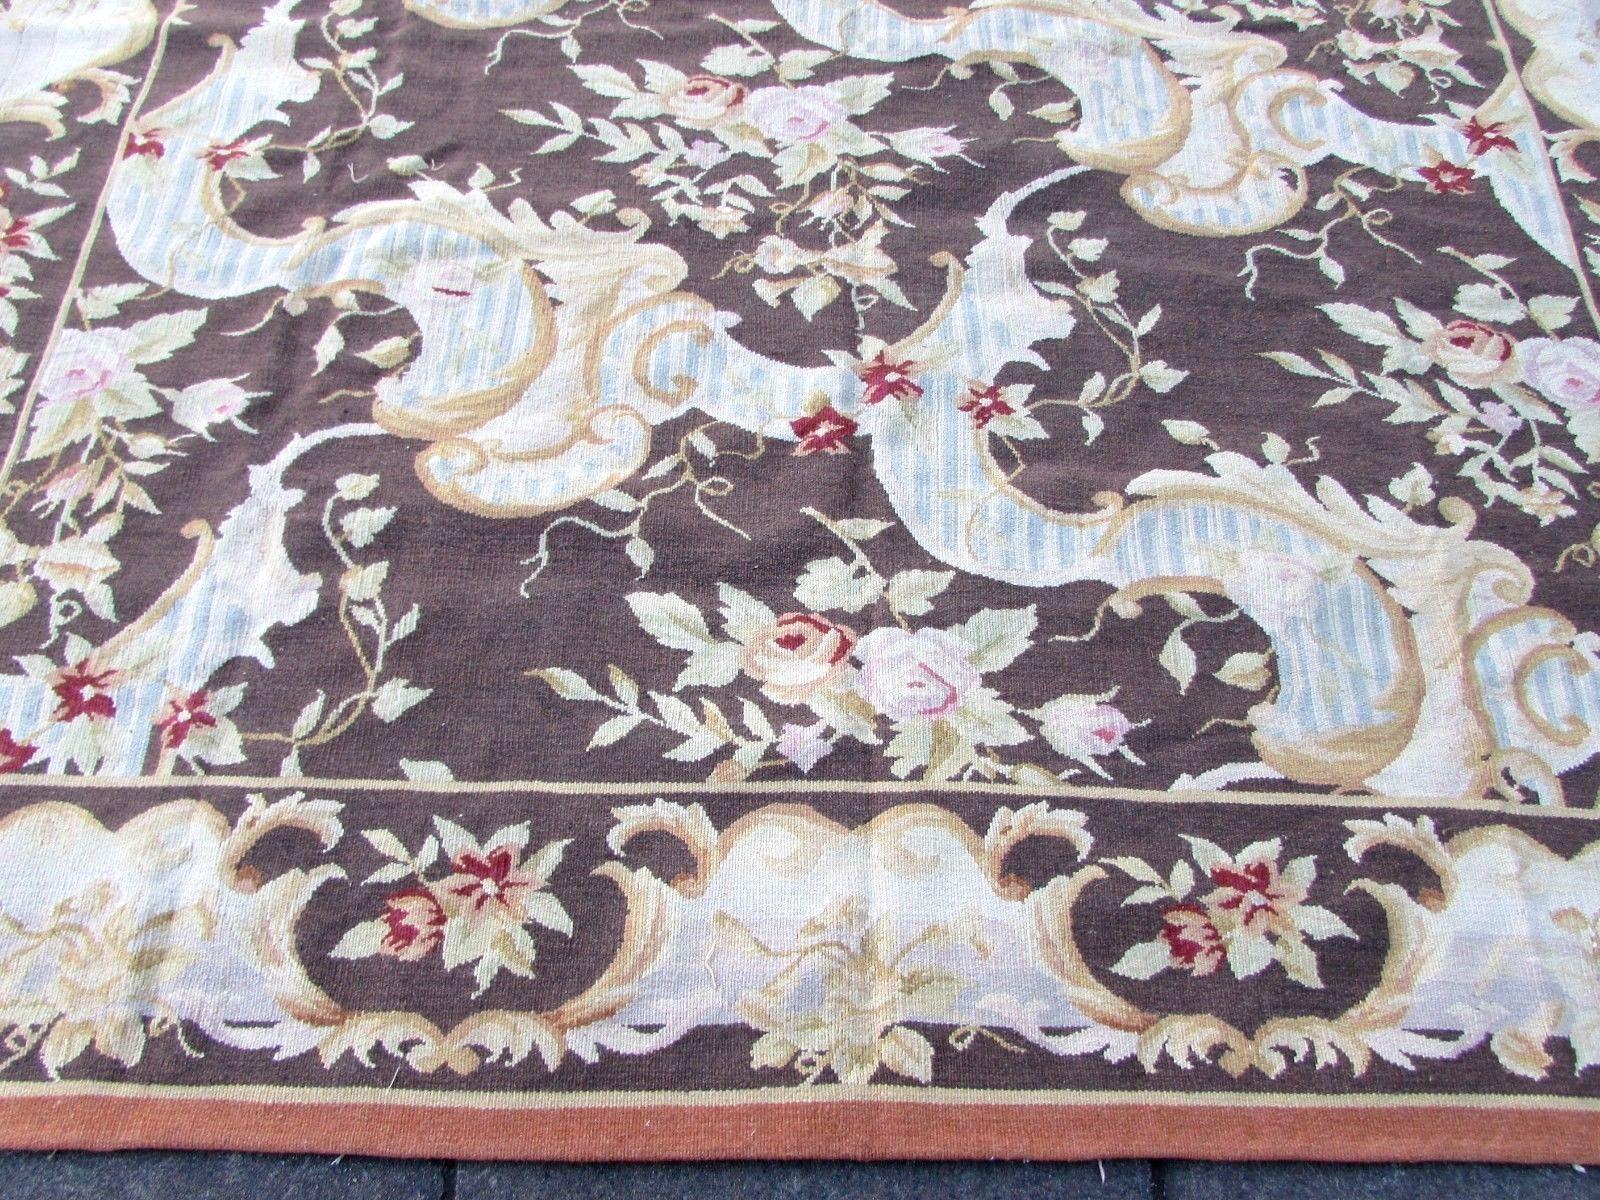 Handmade vintage French Aubusson rug made in wool. This rug has been made in the end of 20th century, it is in original good condition.

-Condition: Original good,

-circa 1980s,

-Size: 8.8' x 9.10' (260cm x 295cm),

-Material: